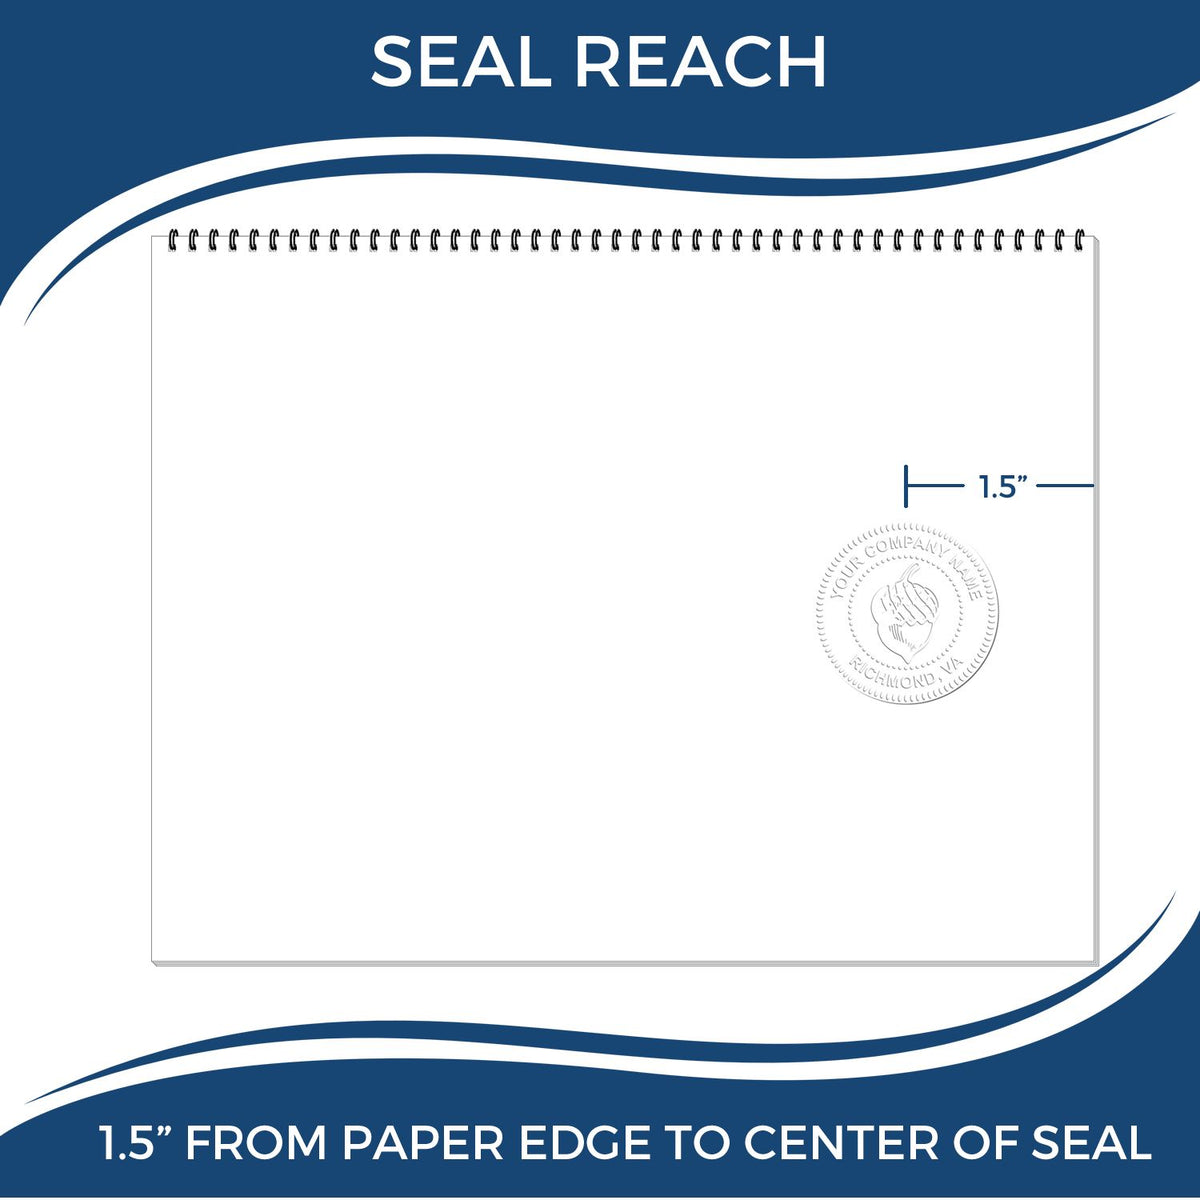 An infographic showing the seal reach which is represented by a ruler and a miniature seal image of the Hybrid Illinois Engineer Seal